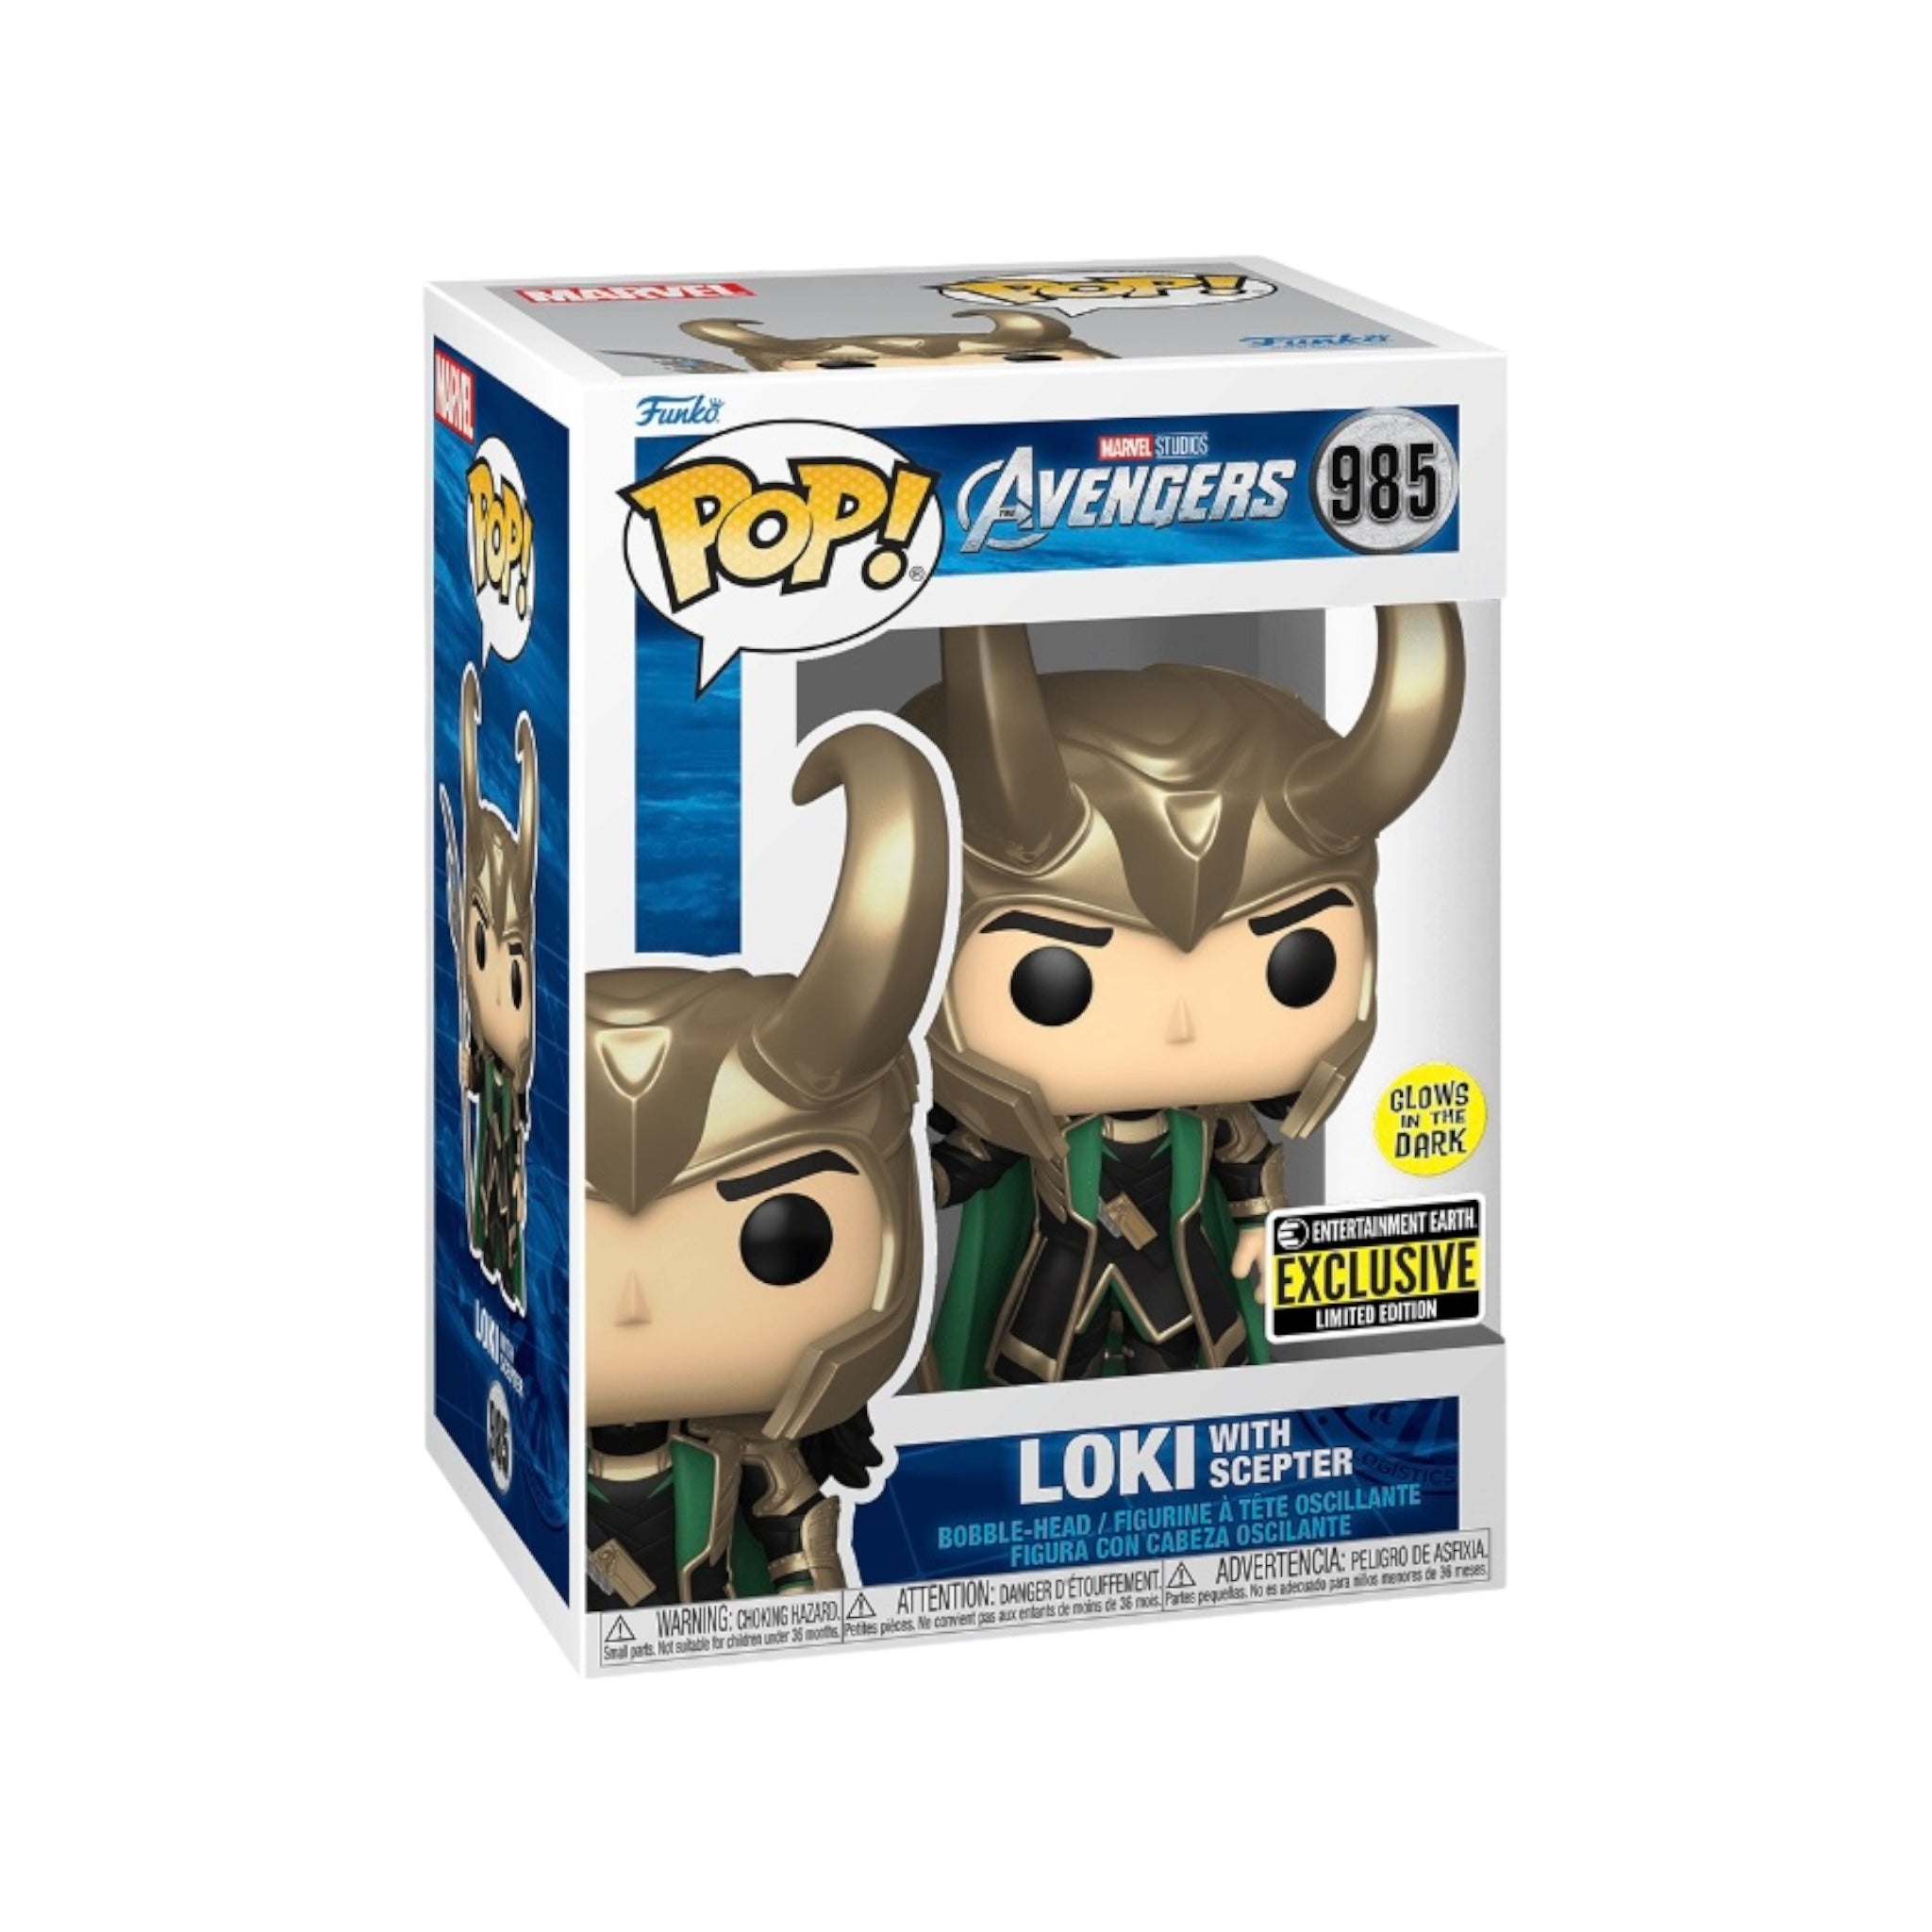 Loki with Scepter #985 (Glows in the Dark) Funko Pop! - The Avengers - Entertainment Earth Exclusive